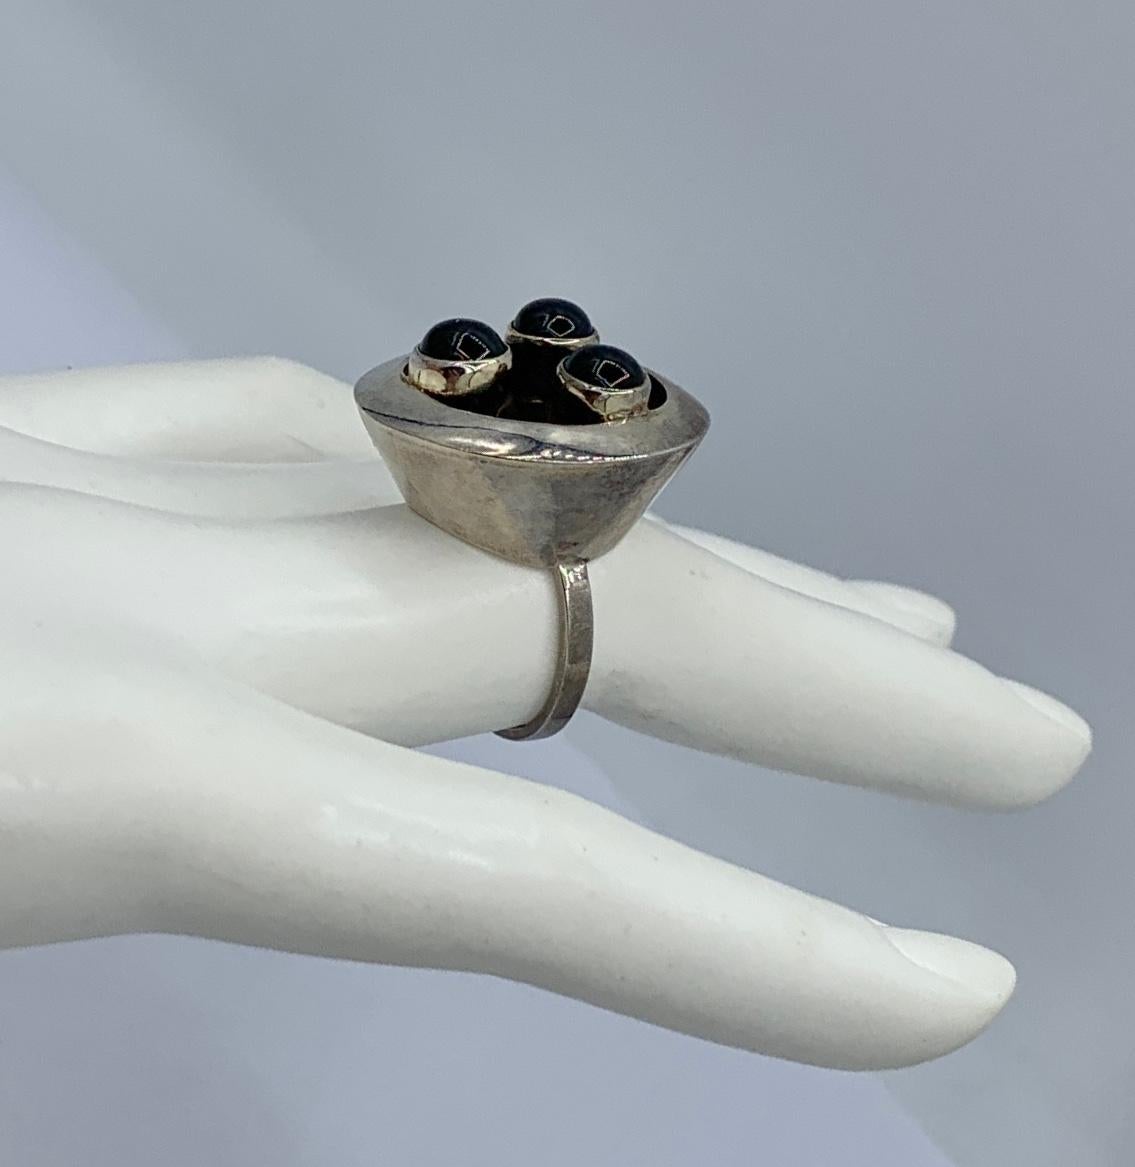 Mixed Cut Burle Marx Black Tourmaline Ring Mid-Century Modern Sterling Silver Original Box For Sale